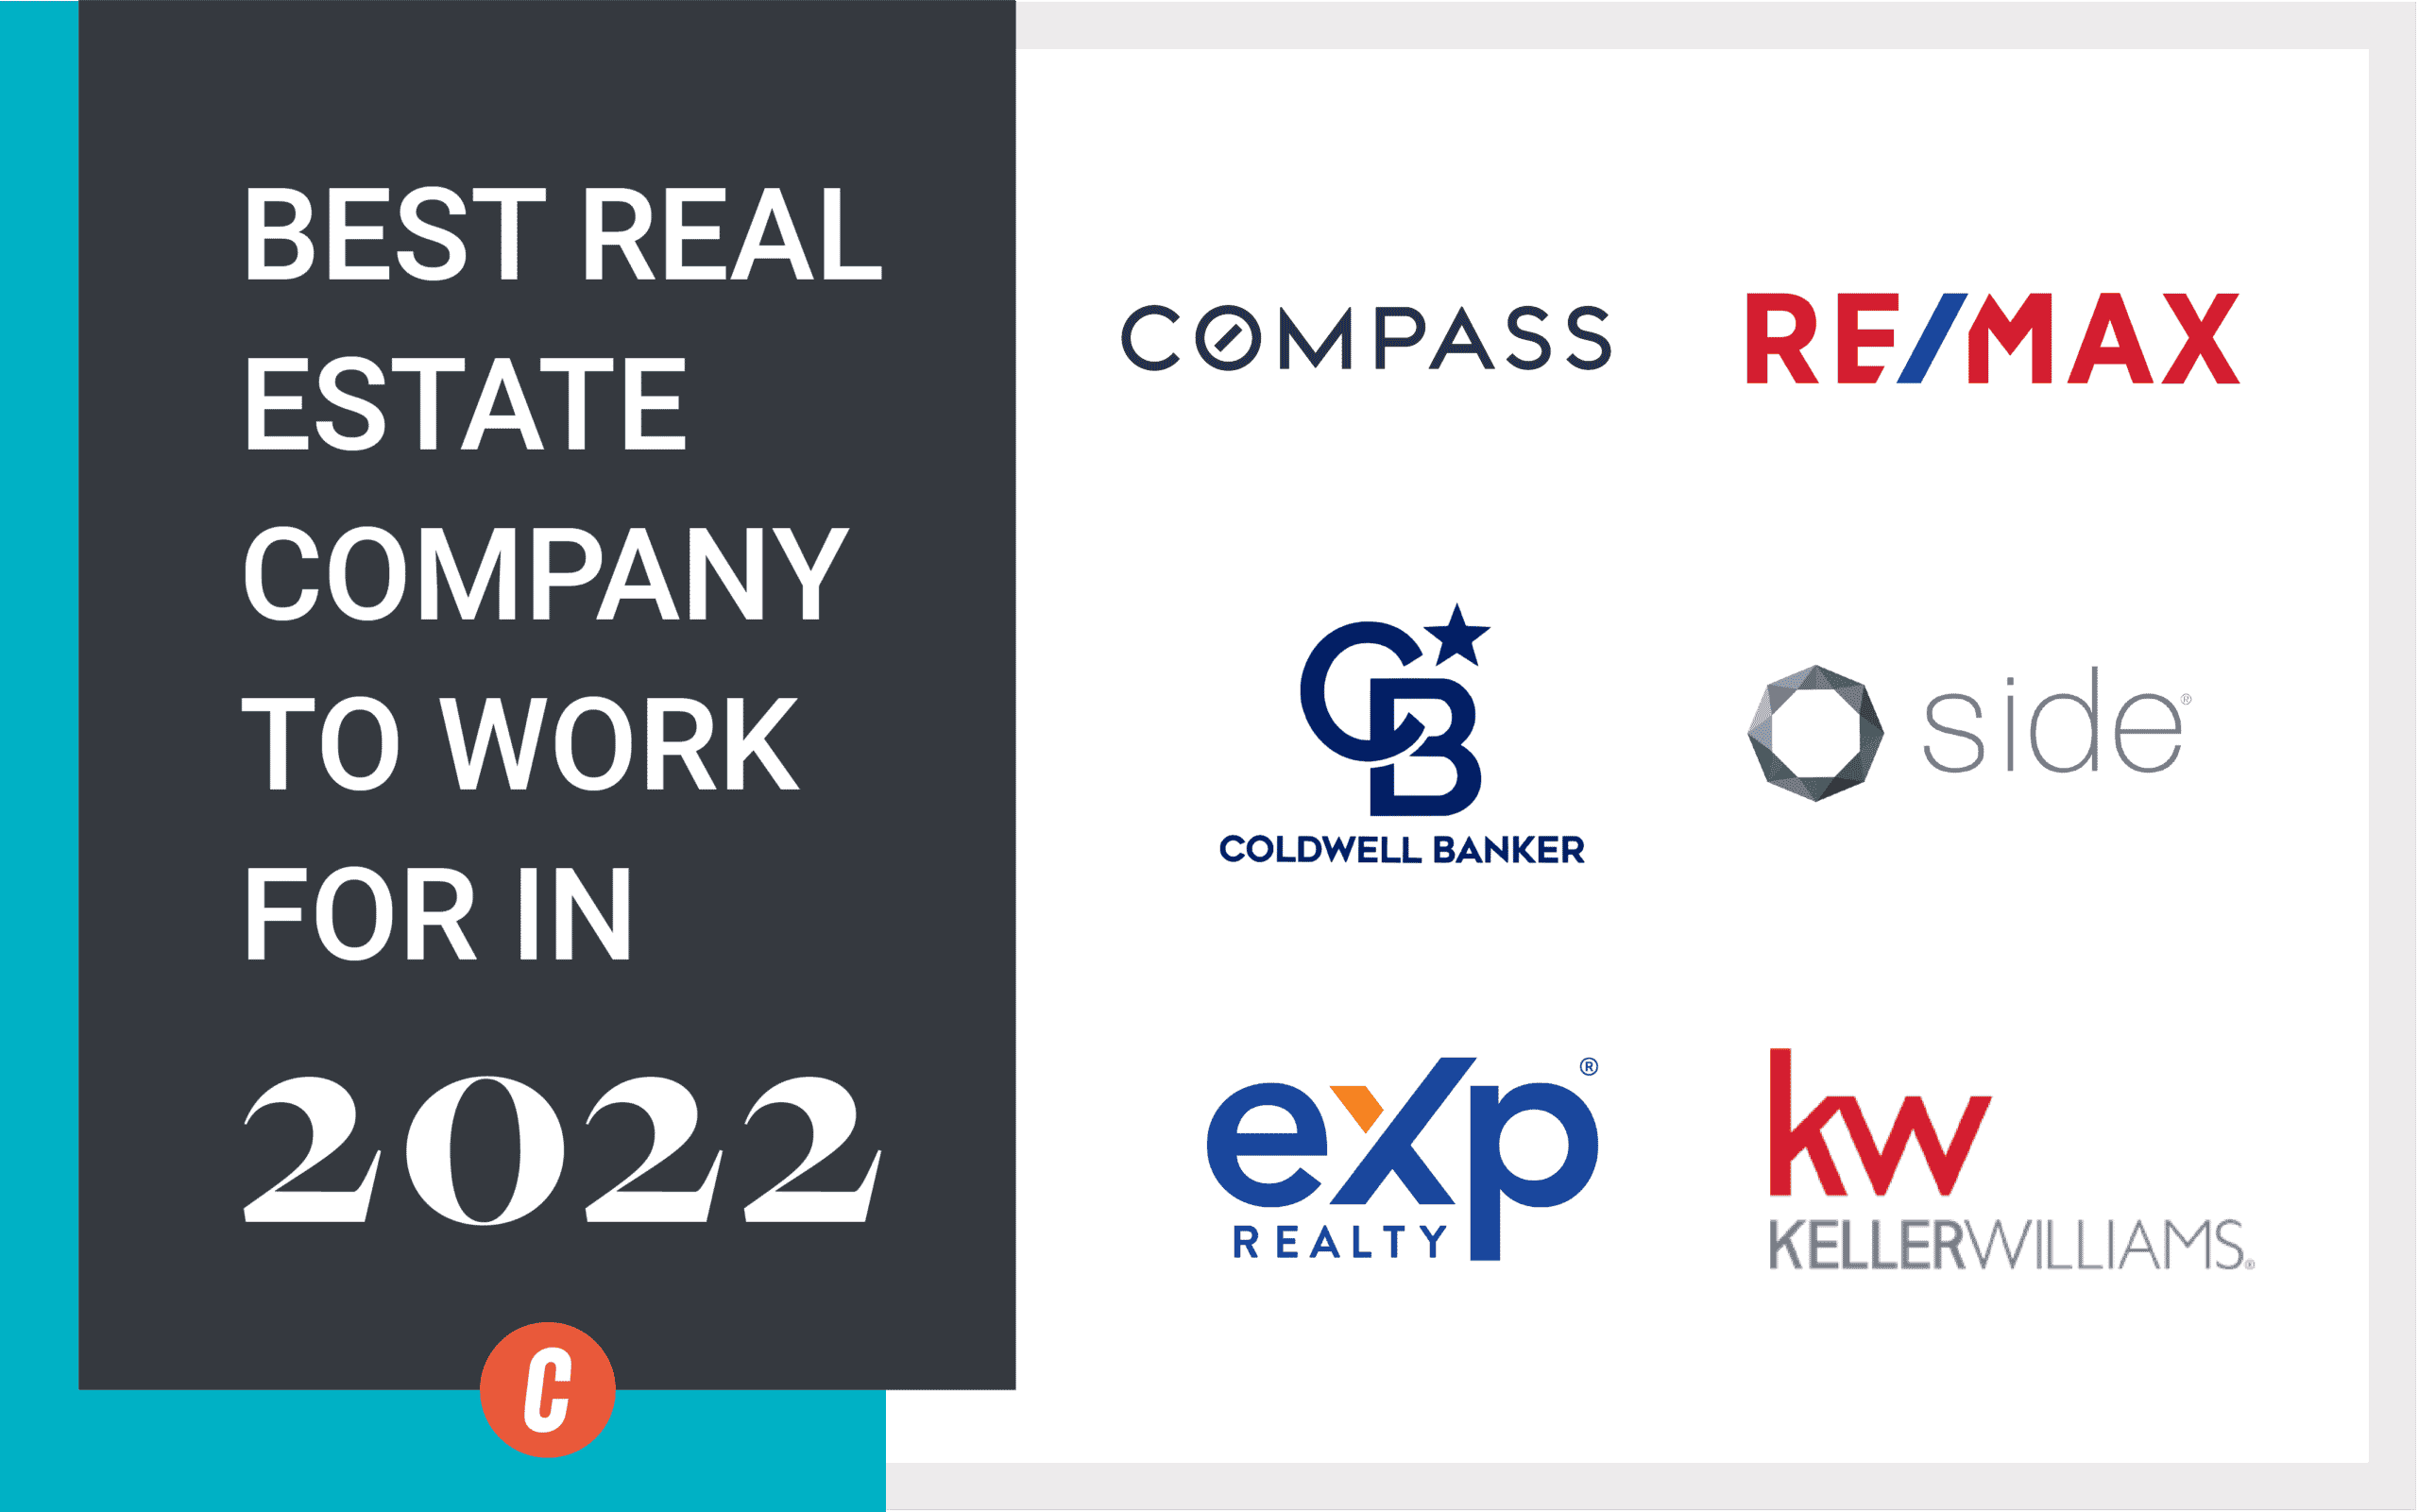 What’s the Best Real Estate Company to Work for?